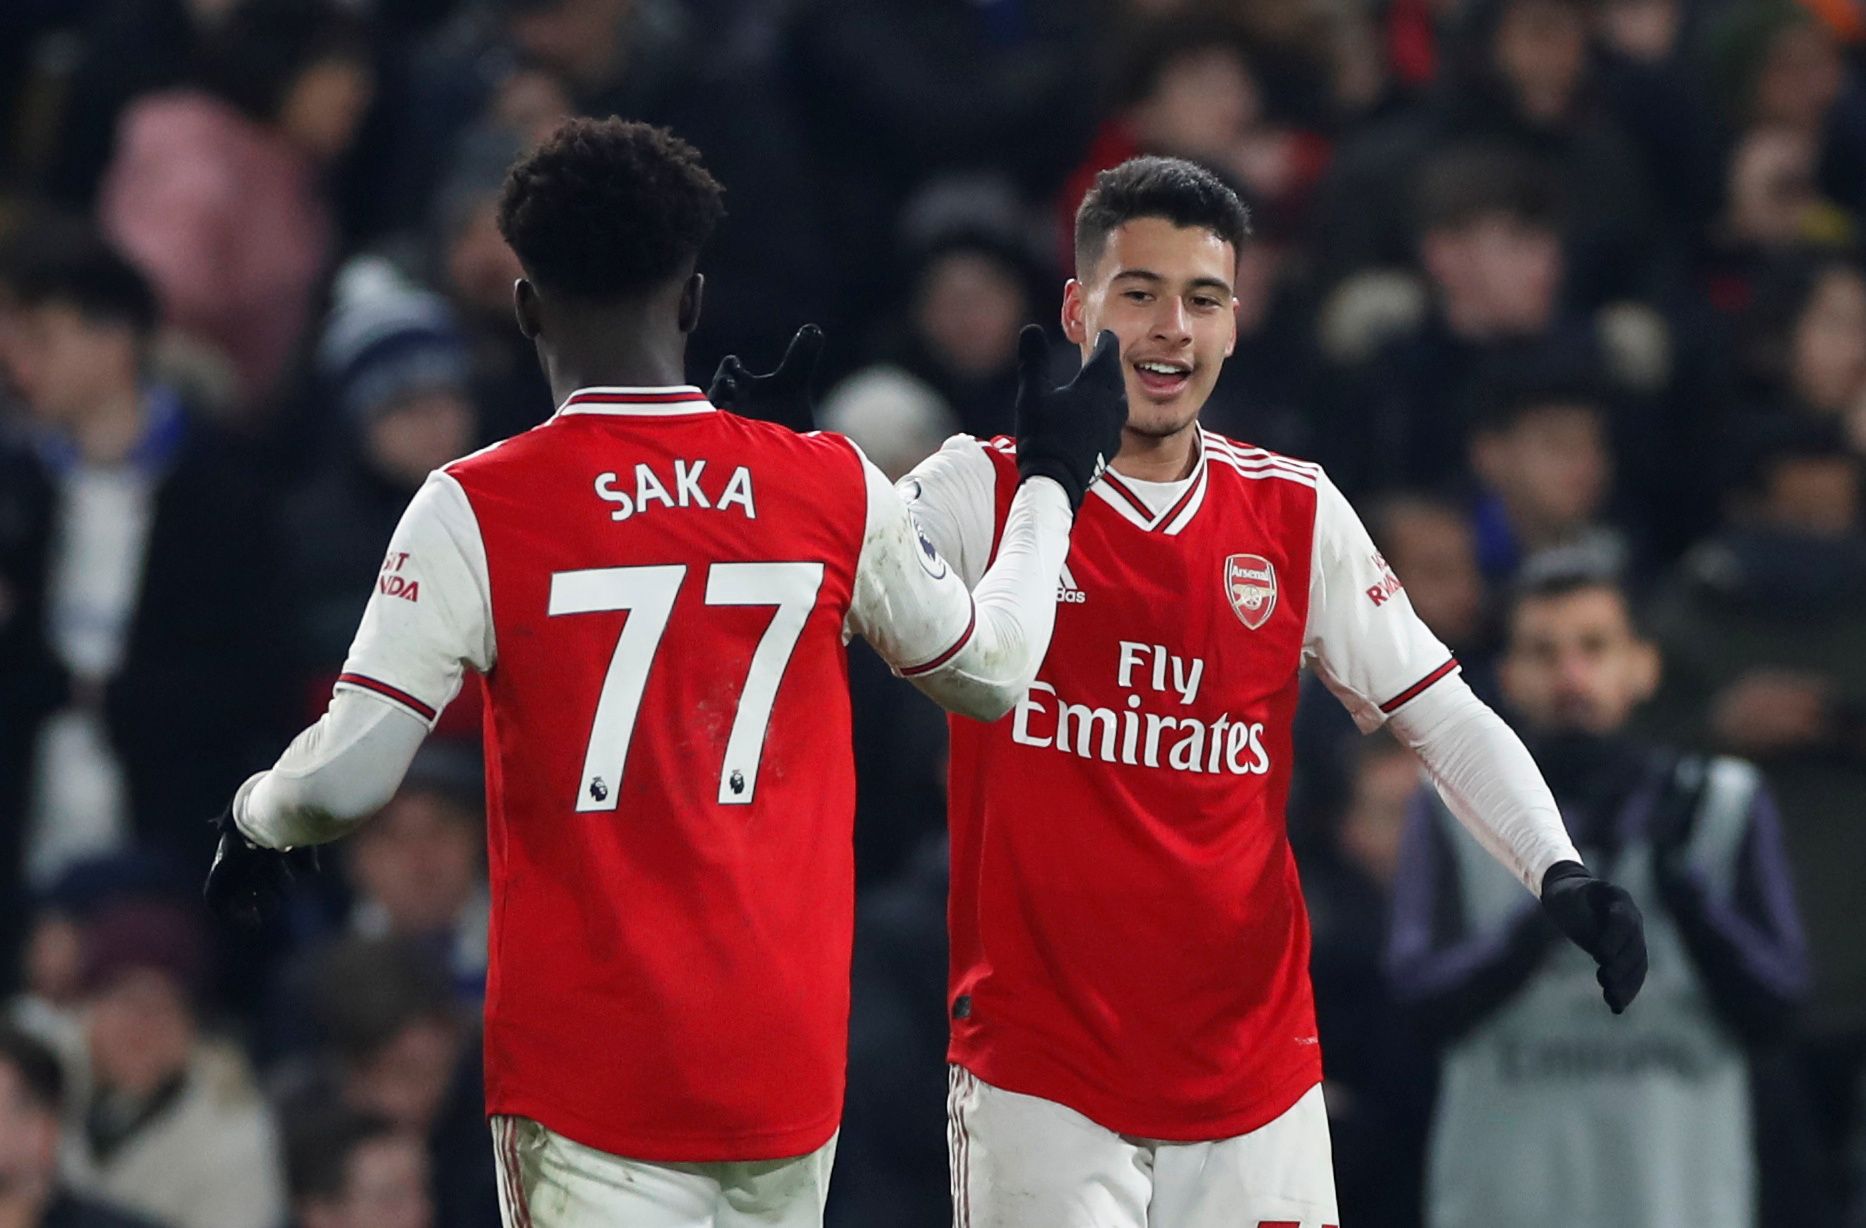 Soccer Football - Premier League - Chelsea v Arsenal - Stamford Bridge, London, Britain - January 21, 2020  Arsenal's Gabriel Martinelli celebrates scoring their first goal with Bukayo Saka   Action Images via Reuters/Paul Childs  EDITORIAL USE ONLY. No use with unauthorized audio, video, data, fixture lists, club/league logos or "live" services. Online in-match use limited to 75 images, no video emulation. No use in betting, games or single club/league/player publications.  Please contact your 